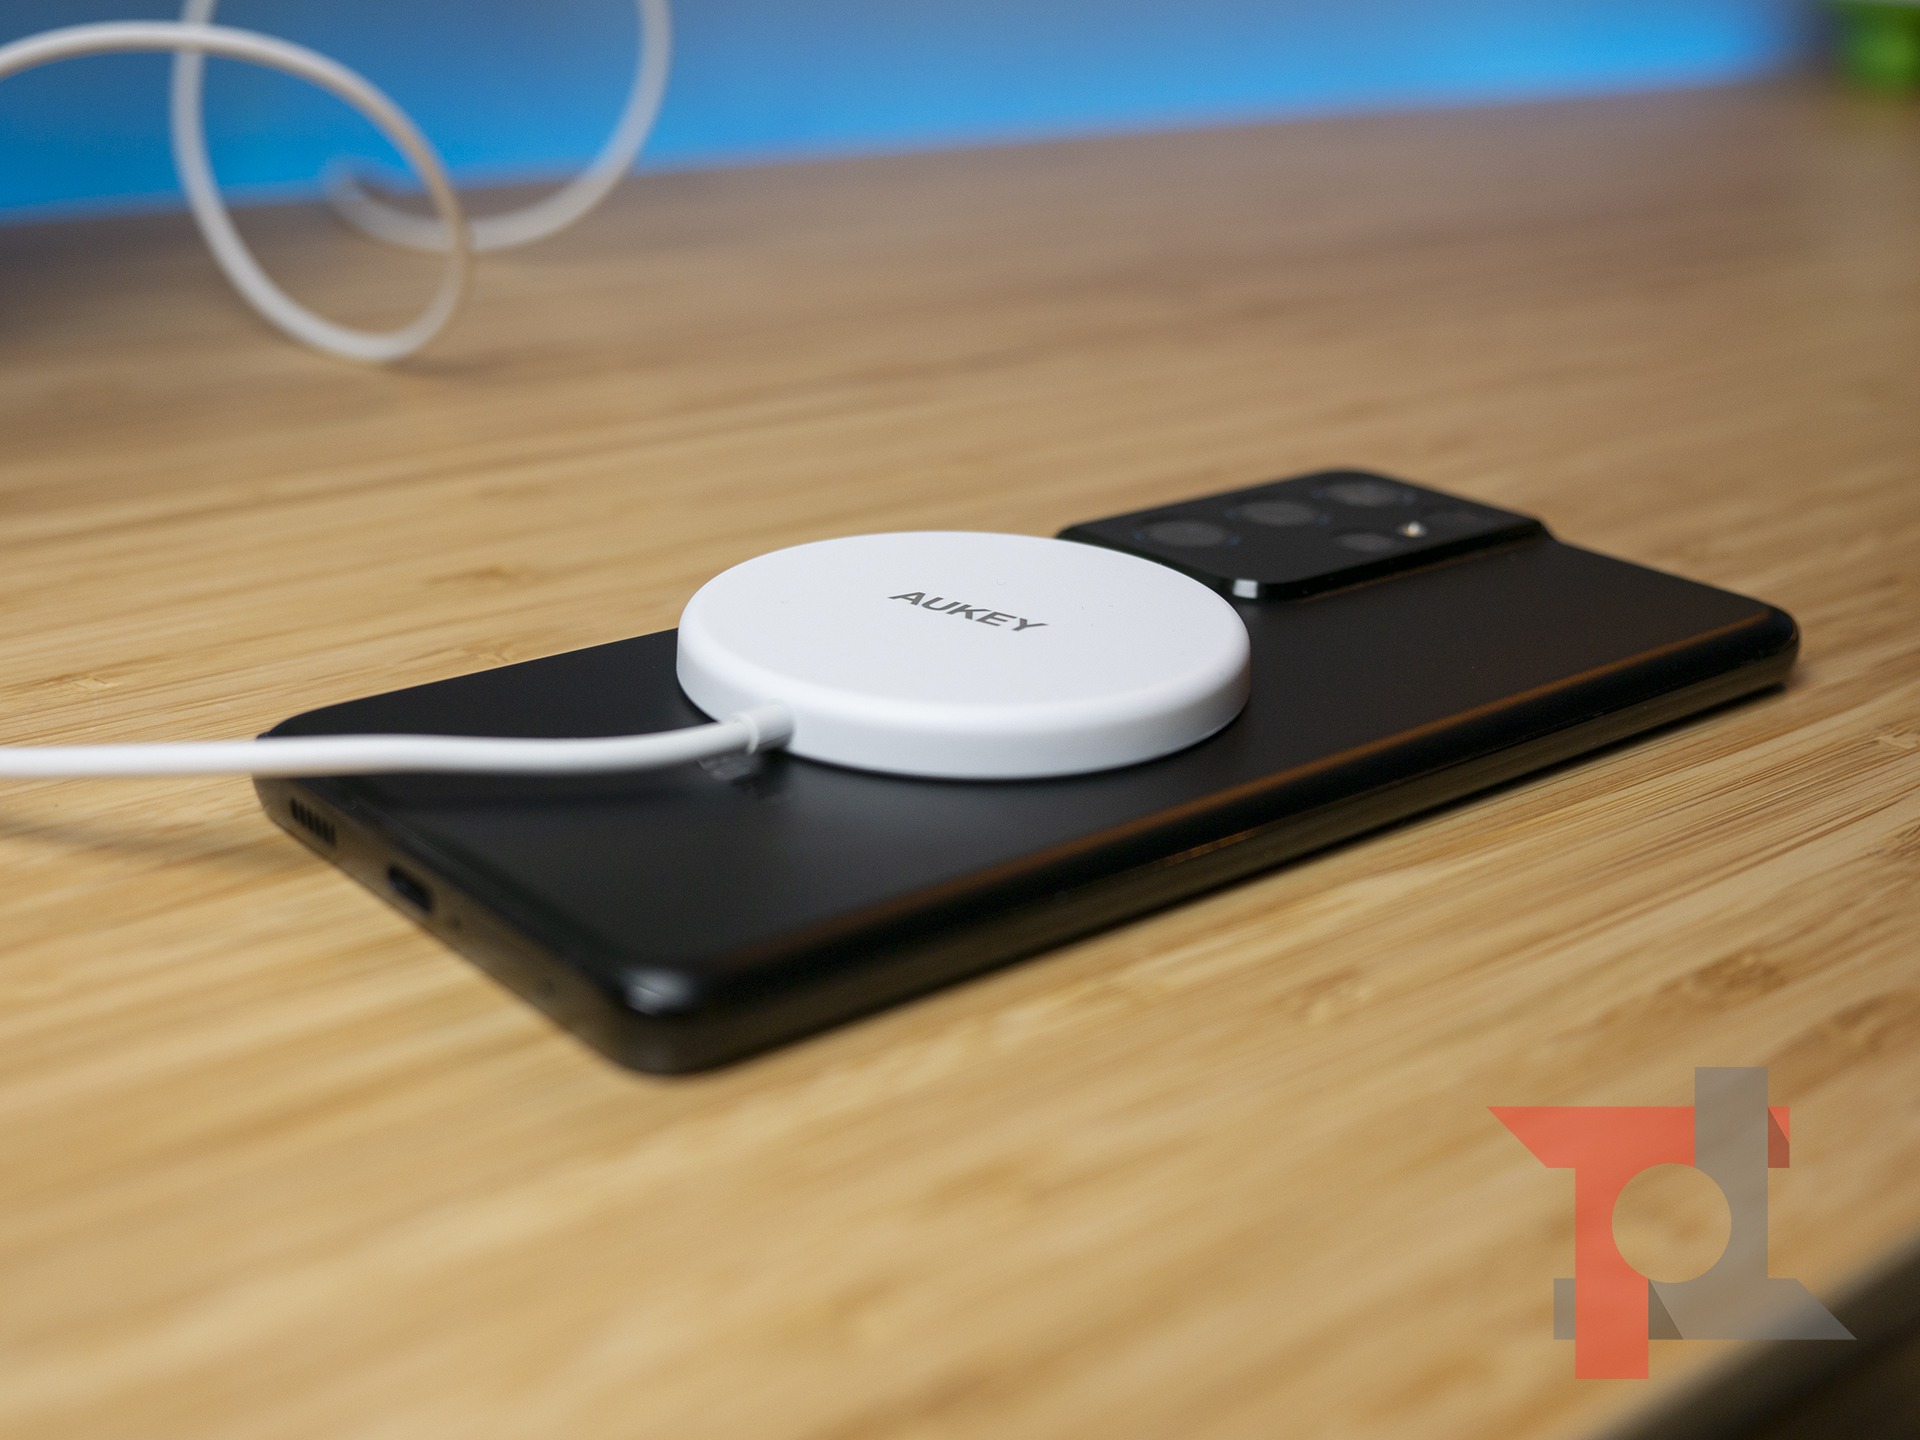 AUKEY lancia Aircore Magnetic wireless Charger, per iPhone 12 ma anche per Android 2